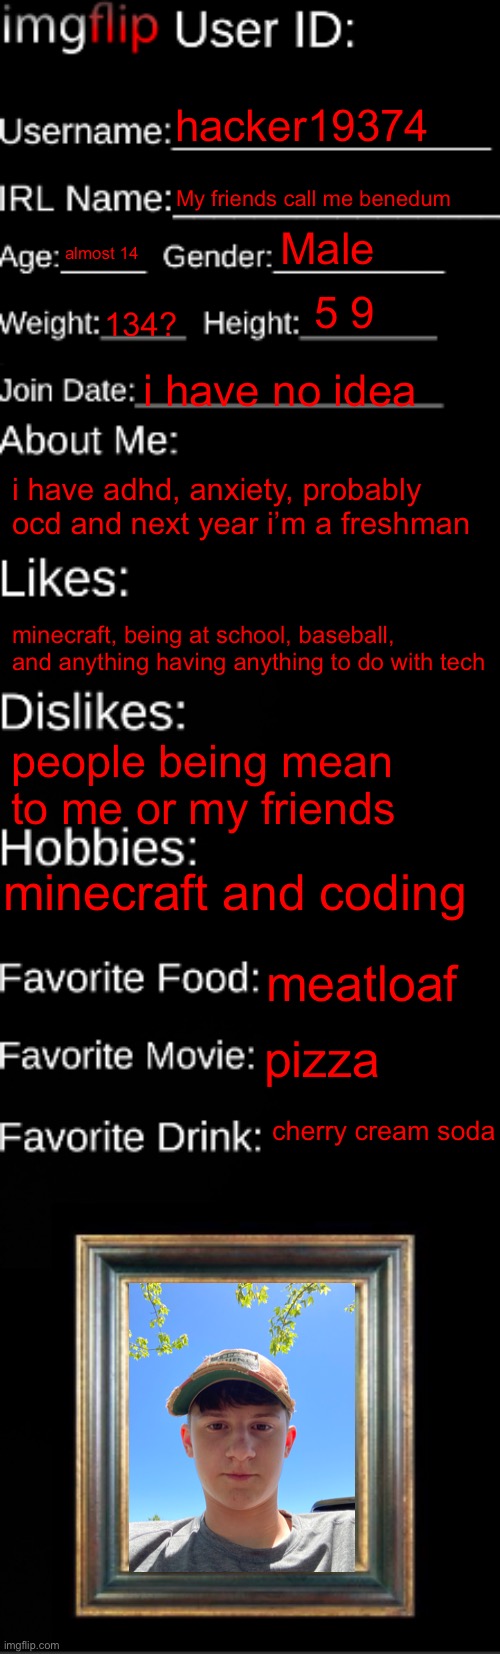 me ? | hacker19374; My friends call me benedum; Male; almost 14; 5 9; 134? i have no idea; i have adhd, anxiety, probably ocd and next year i’m a freshman; minecraft, being at school, baseball, and anything having anything to do with tech; people being mean to me or my friends; minecraft and coding; meatloaf; pizza; cherry cream soda | image tagged in imgflip id card,hacker19374 | made w/ Imgflip meme maker